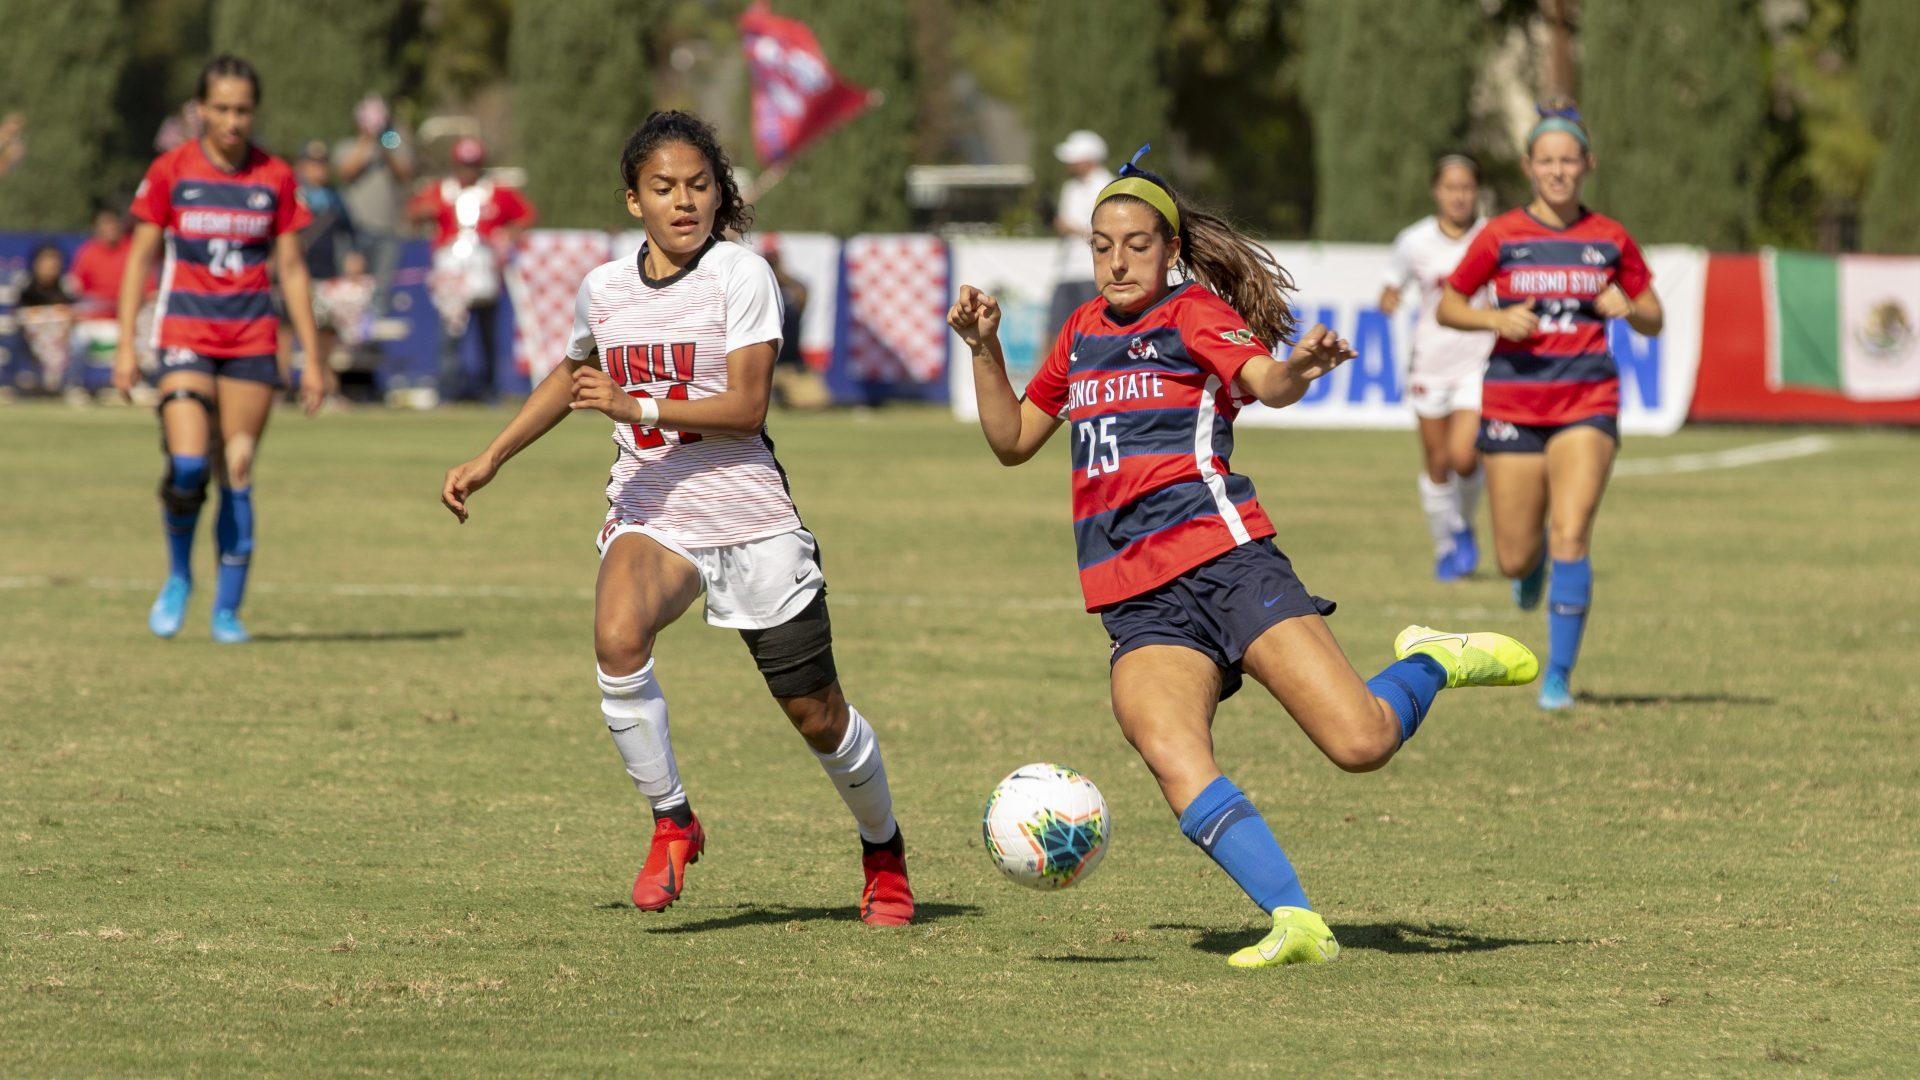 Fresno State defender Danielle Pacheco kicks the ball away from the striker during a 2-1 win against the University of Las Vegas Nevada (UNLV) at the Soccer and Lacrosse stadium on Sunday, Oct. 20, 2019. (Jorge Rodriguez/The Collegian)